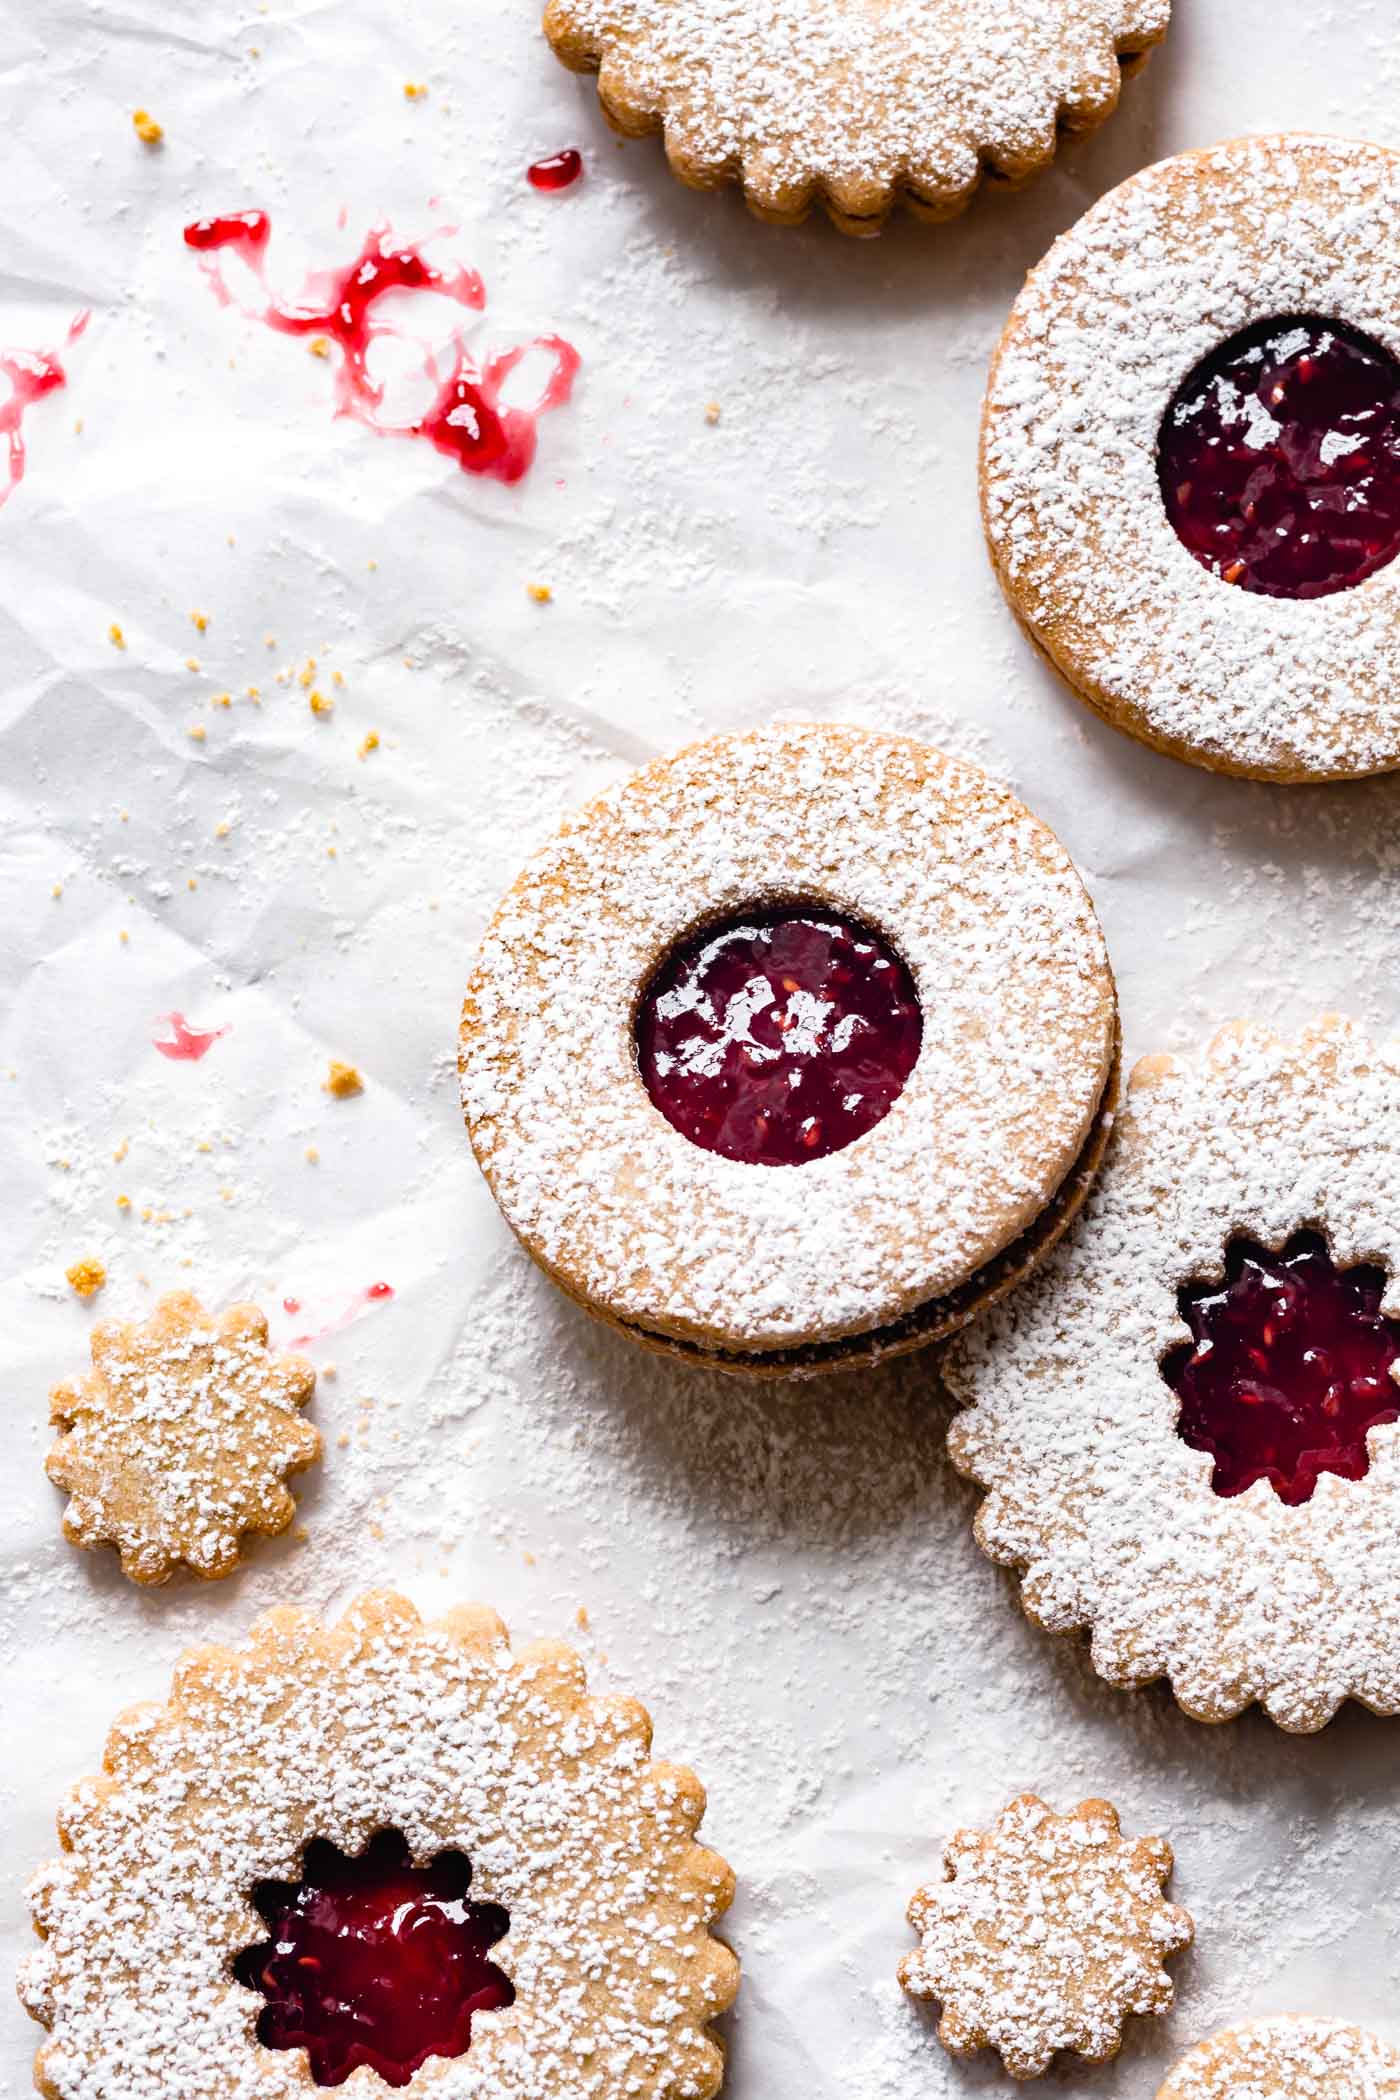 Linzer cookies sit attractively on a rumpled piece of white parchment with sprinkles of powdered sugar resembling snow all around them